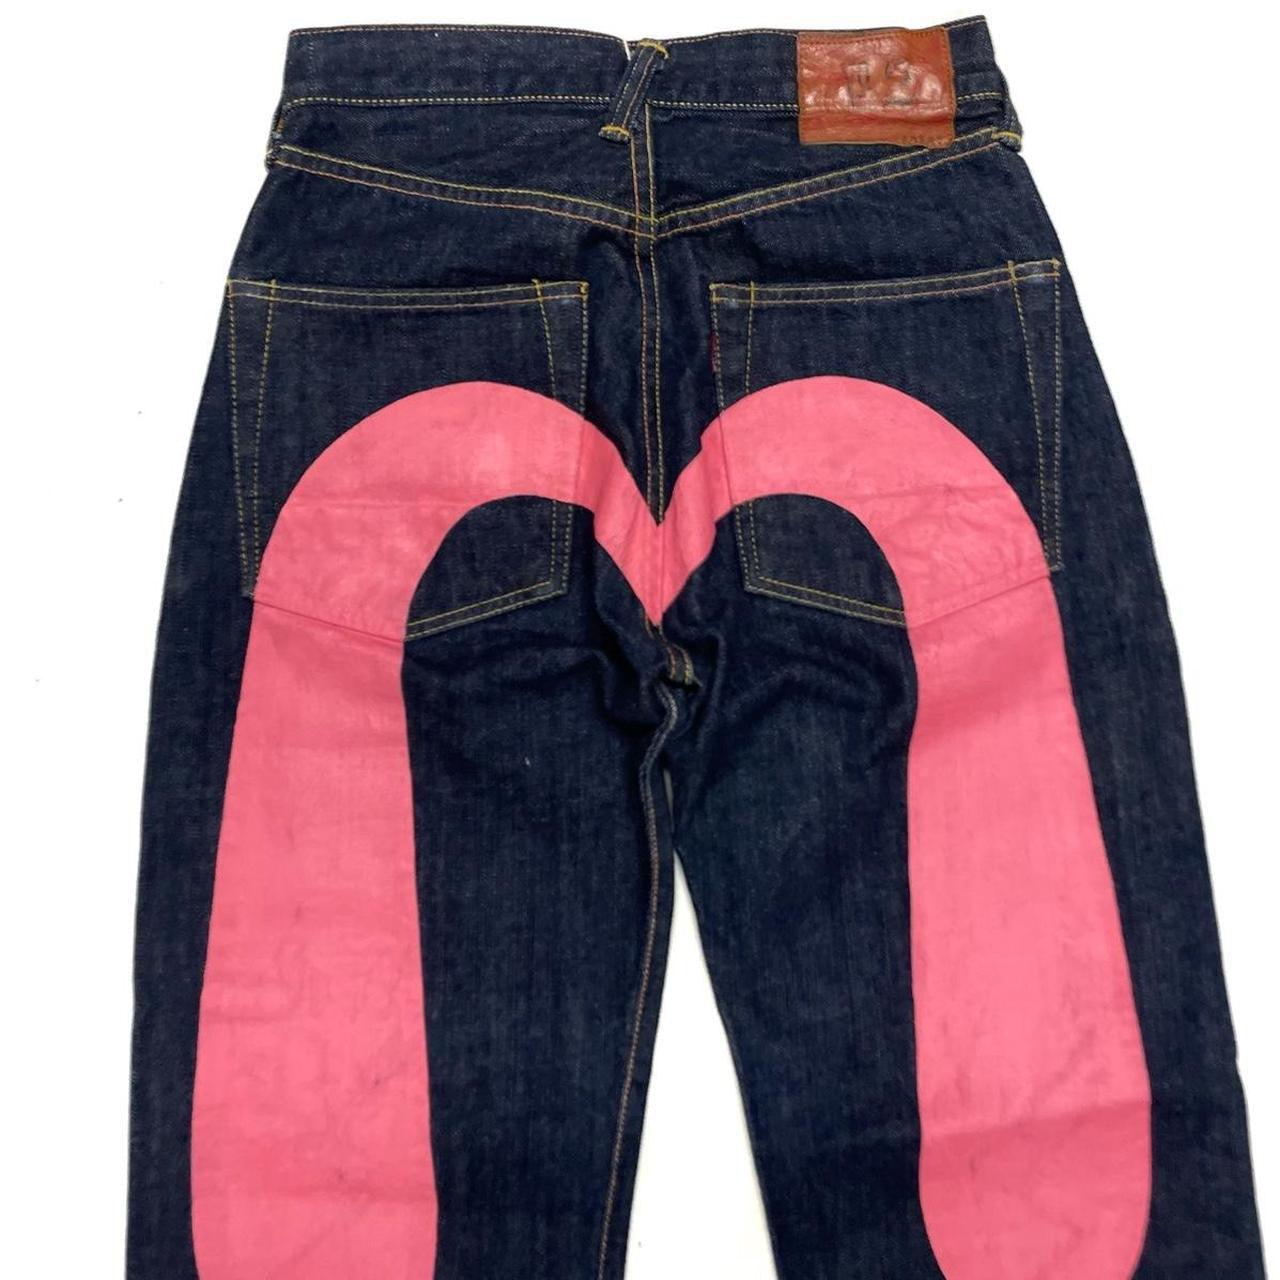 Evisu Selvedge Jeans With Pink Daicock & Printed Front Pockets ( W28 ) - Known Source